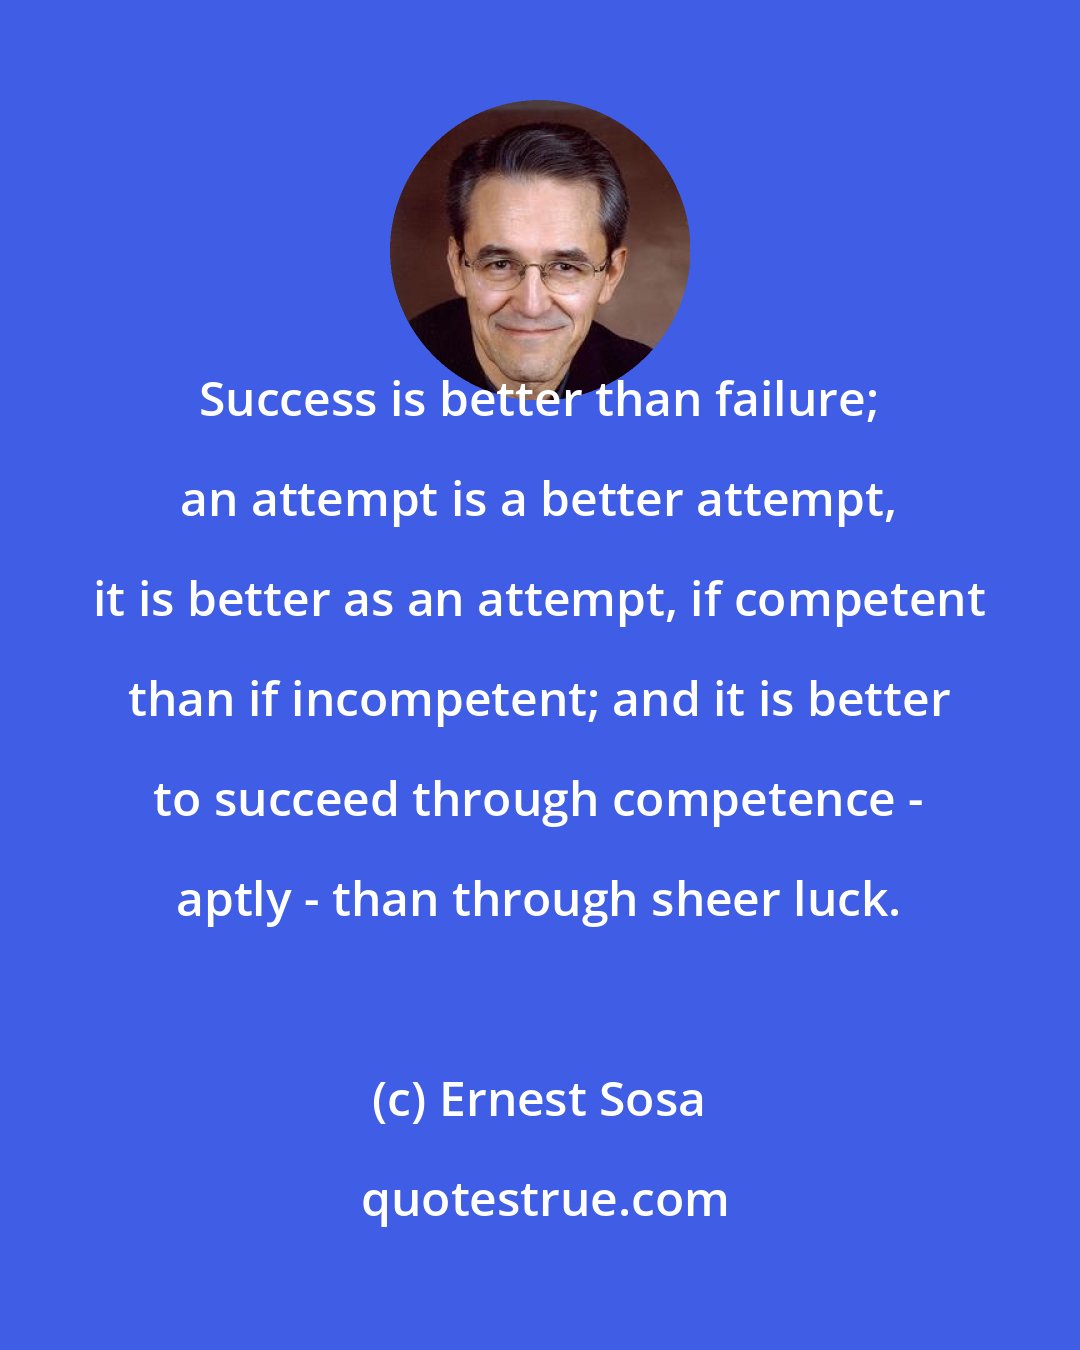 Ernest Sosa: Success is better than failure; an attempt is a better attempt, it is better as an attempt, if competent than if incompetent; and it is better to succeed through competence - aptly - than through sheer luck.